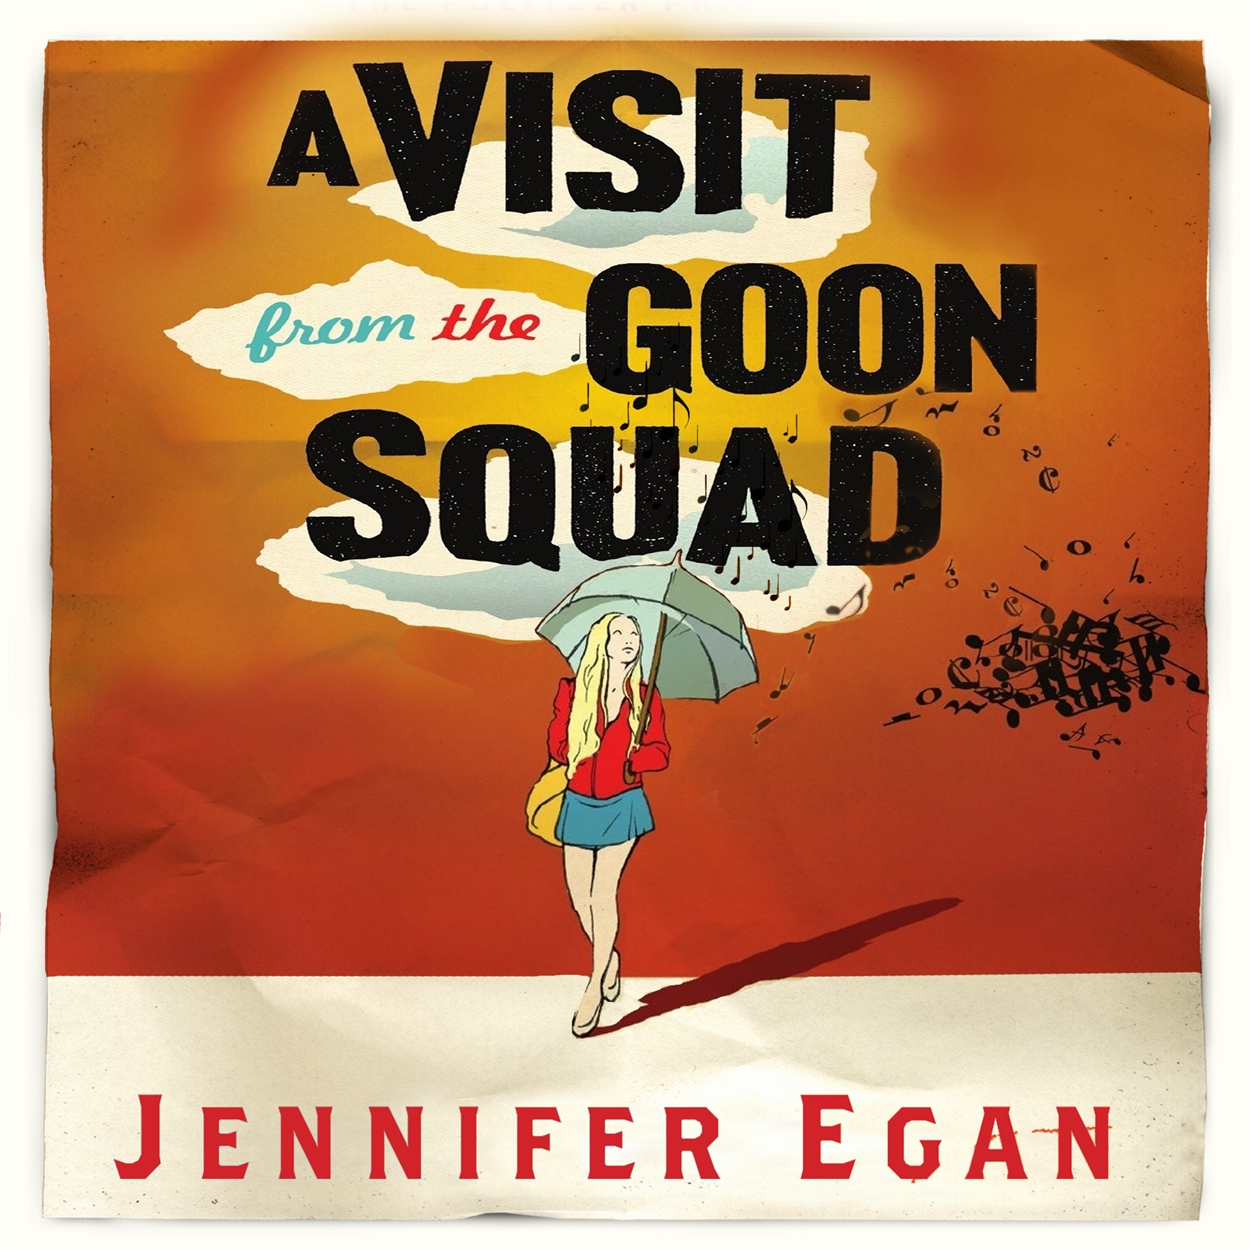 review of a visit from the goon squad